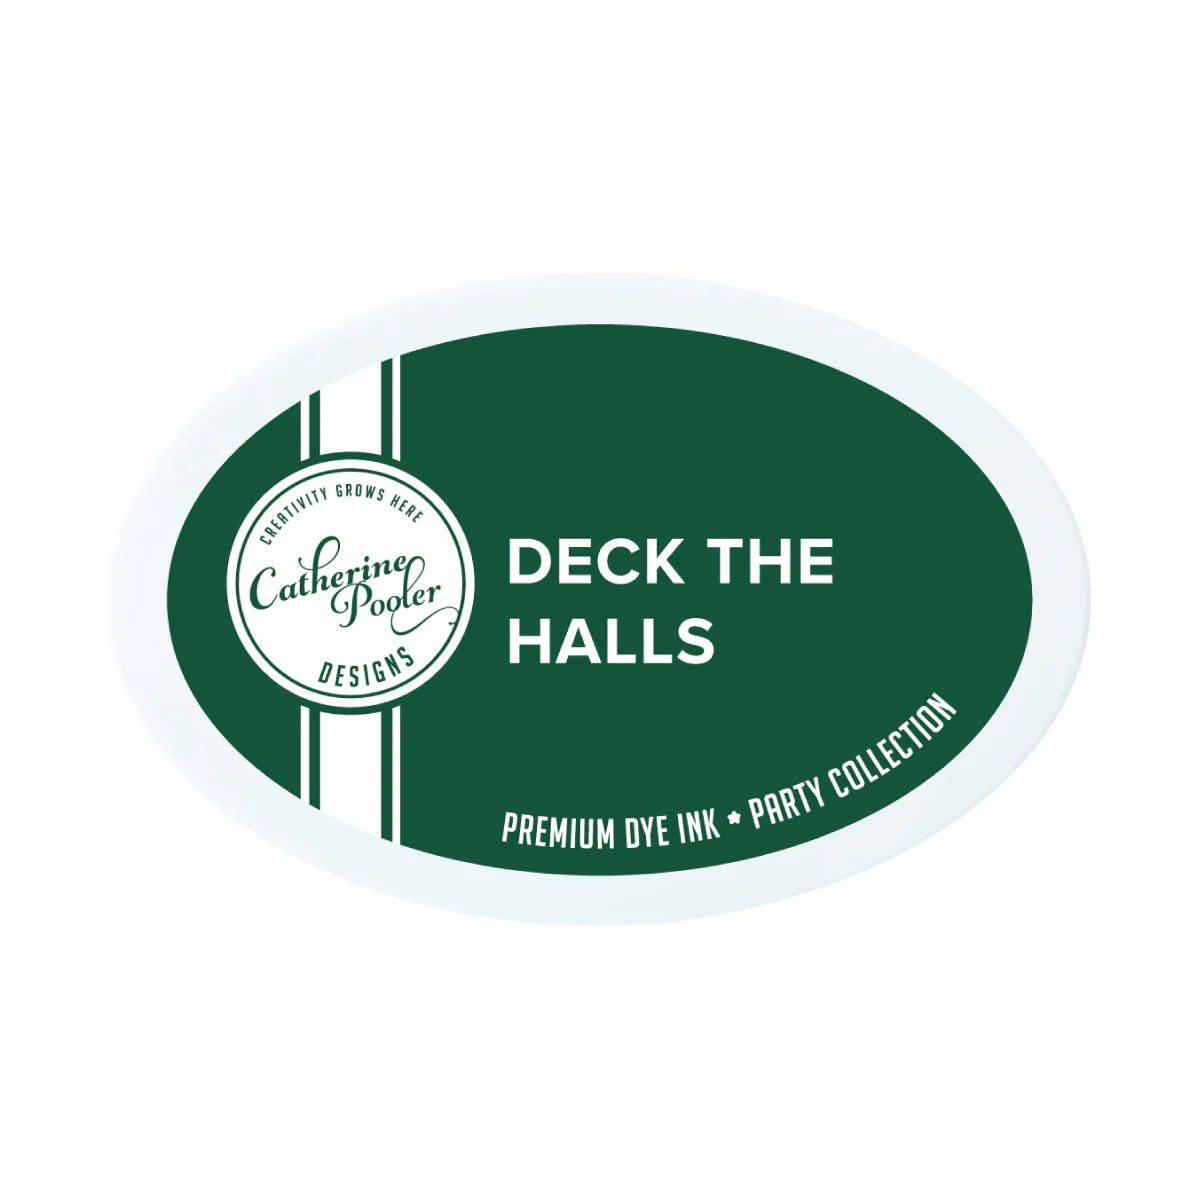 Deck the Halls Premium Dye Ink Pads - Party Collection